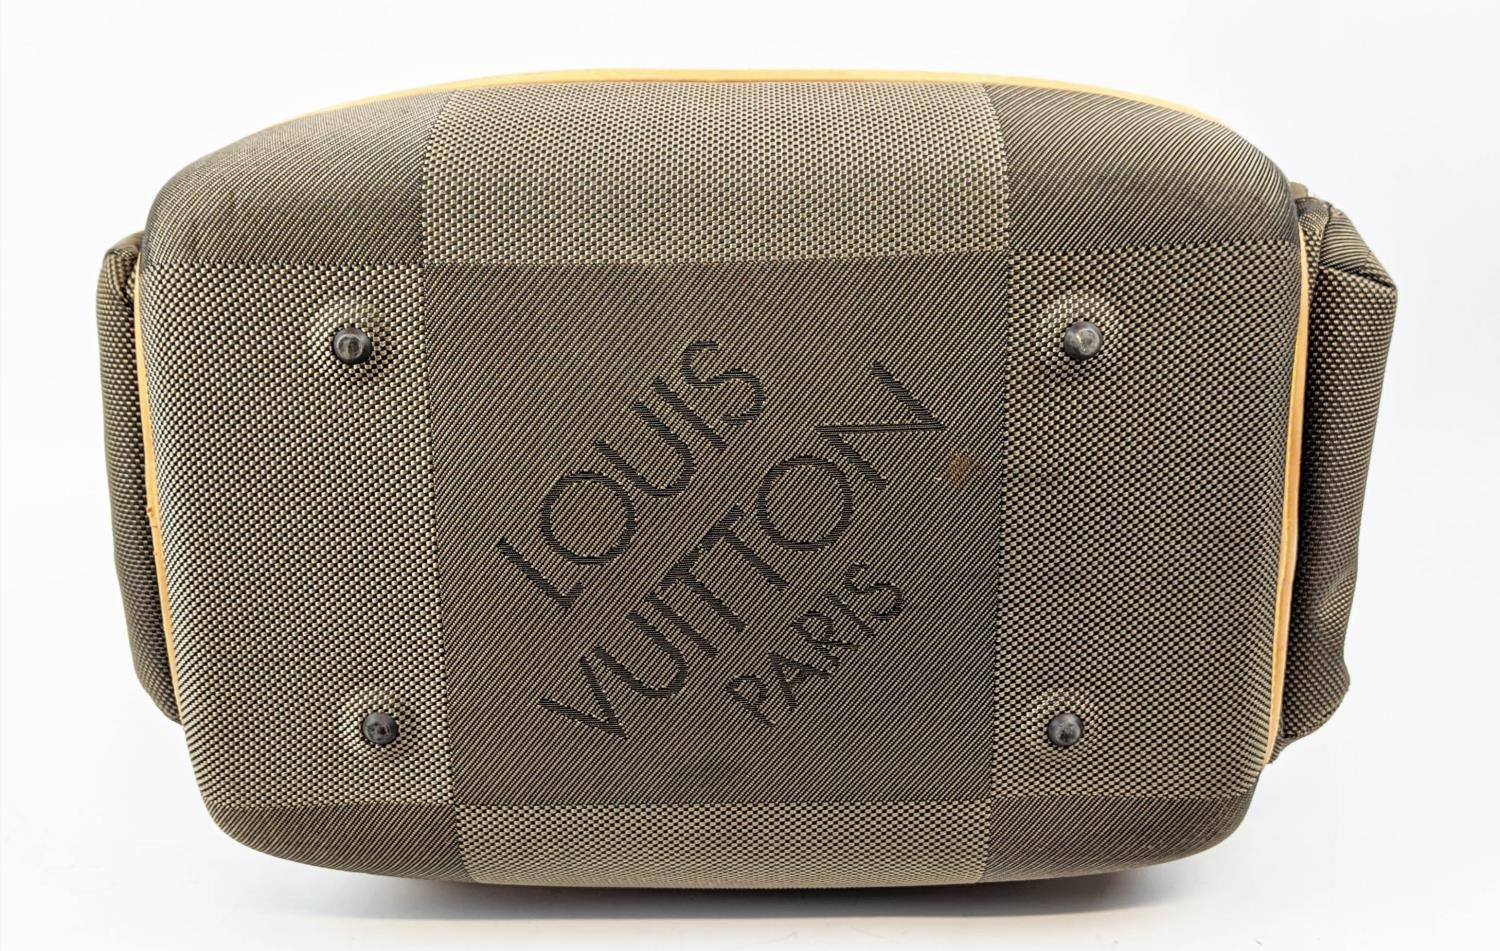 LOUIS VUITTON GEANT AVENTURIER TRAVEL BAG, grey canvas with natural leather trims and handles,